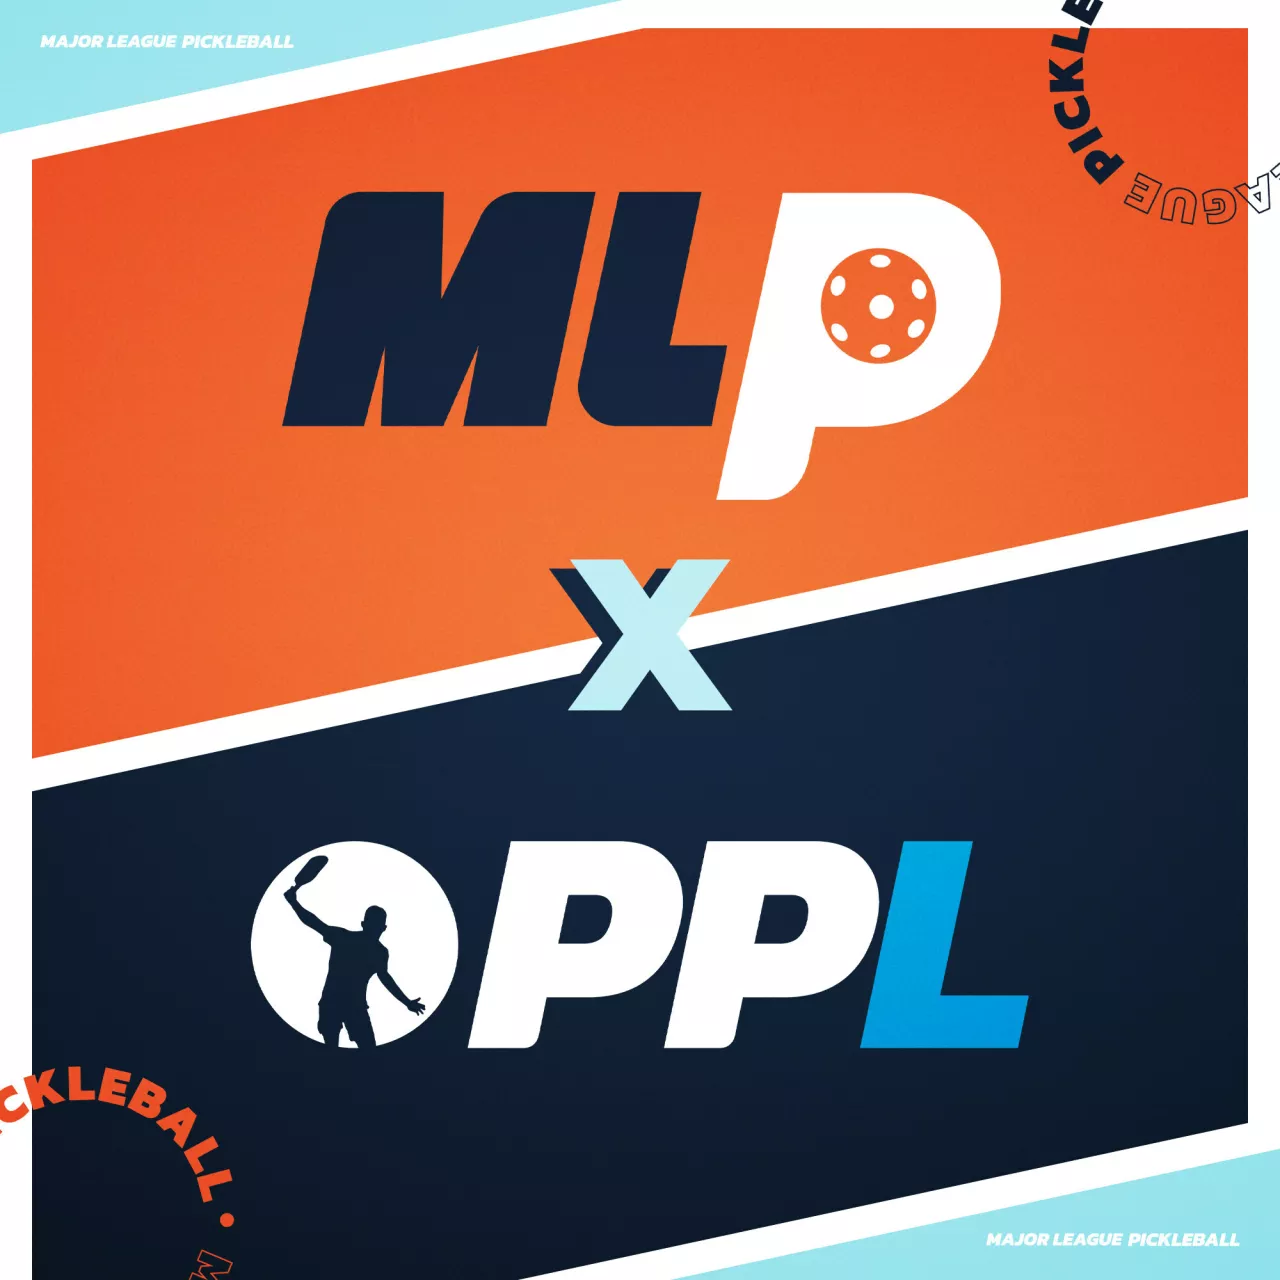 Major League Pickleball partners with Australia for first international expansion img#1